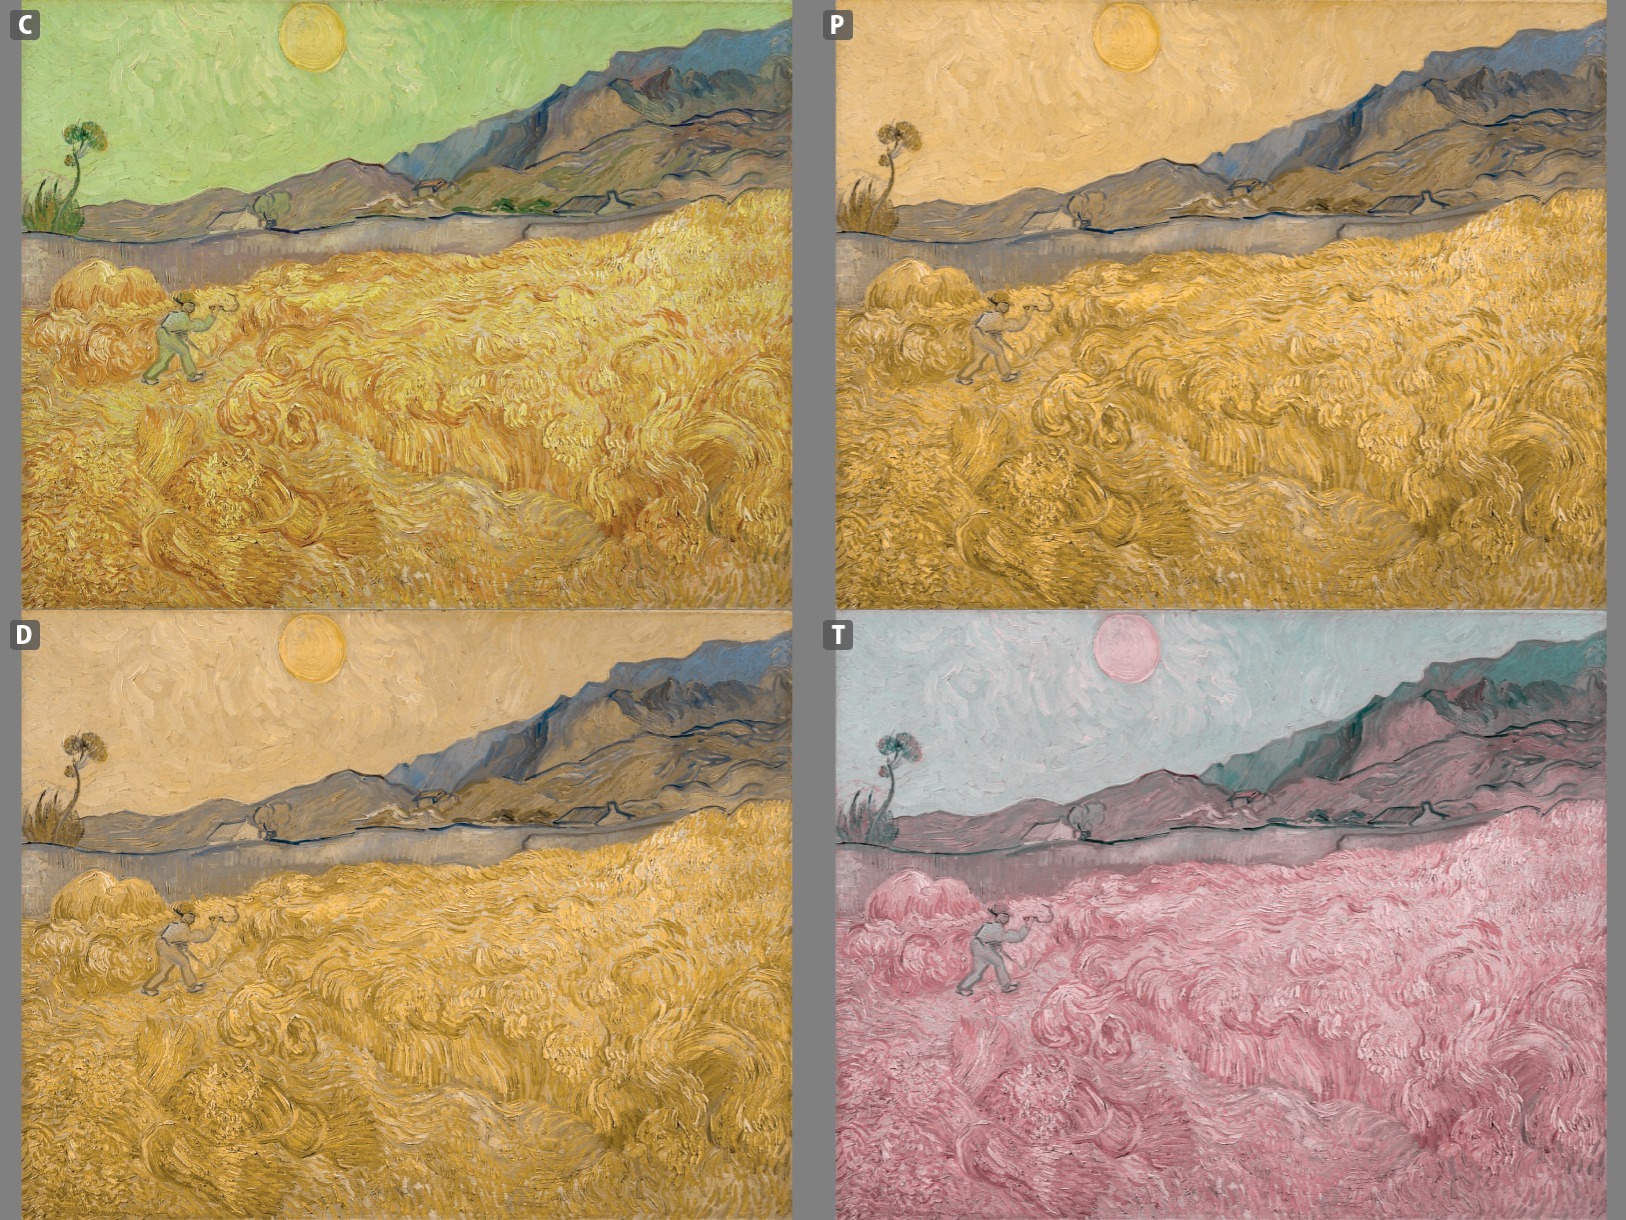 Four images of the painting of Wheatfield with a Reaper by Vincent van Gogh under different types of color blindness. Source: https://asada.website/webCVS/